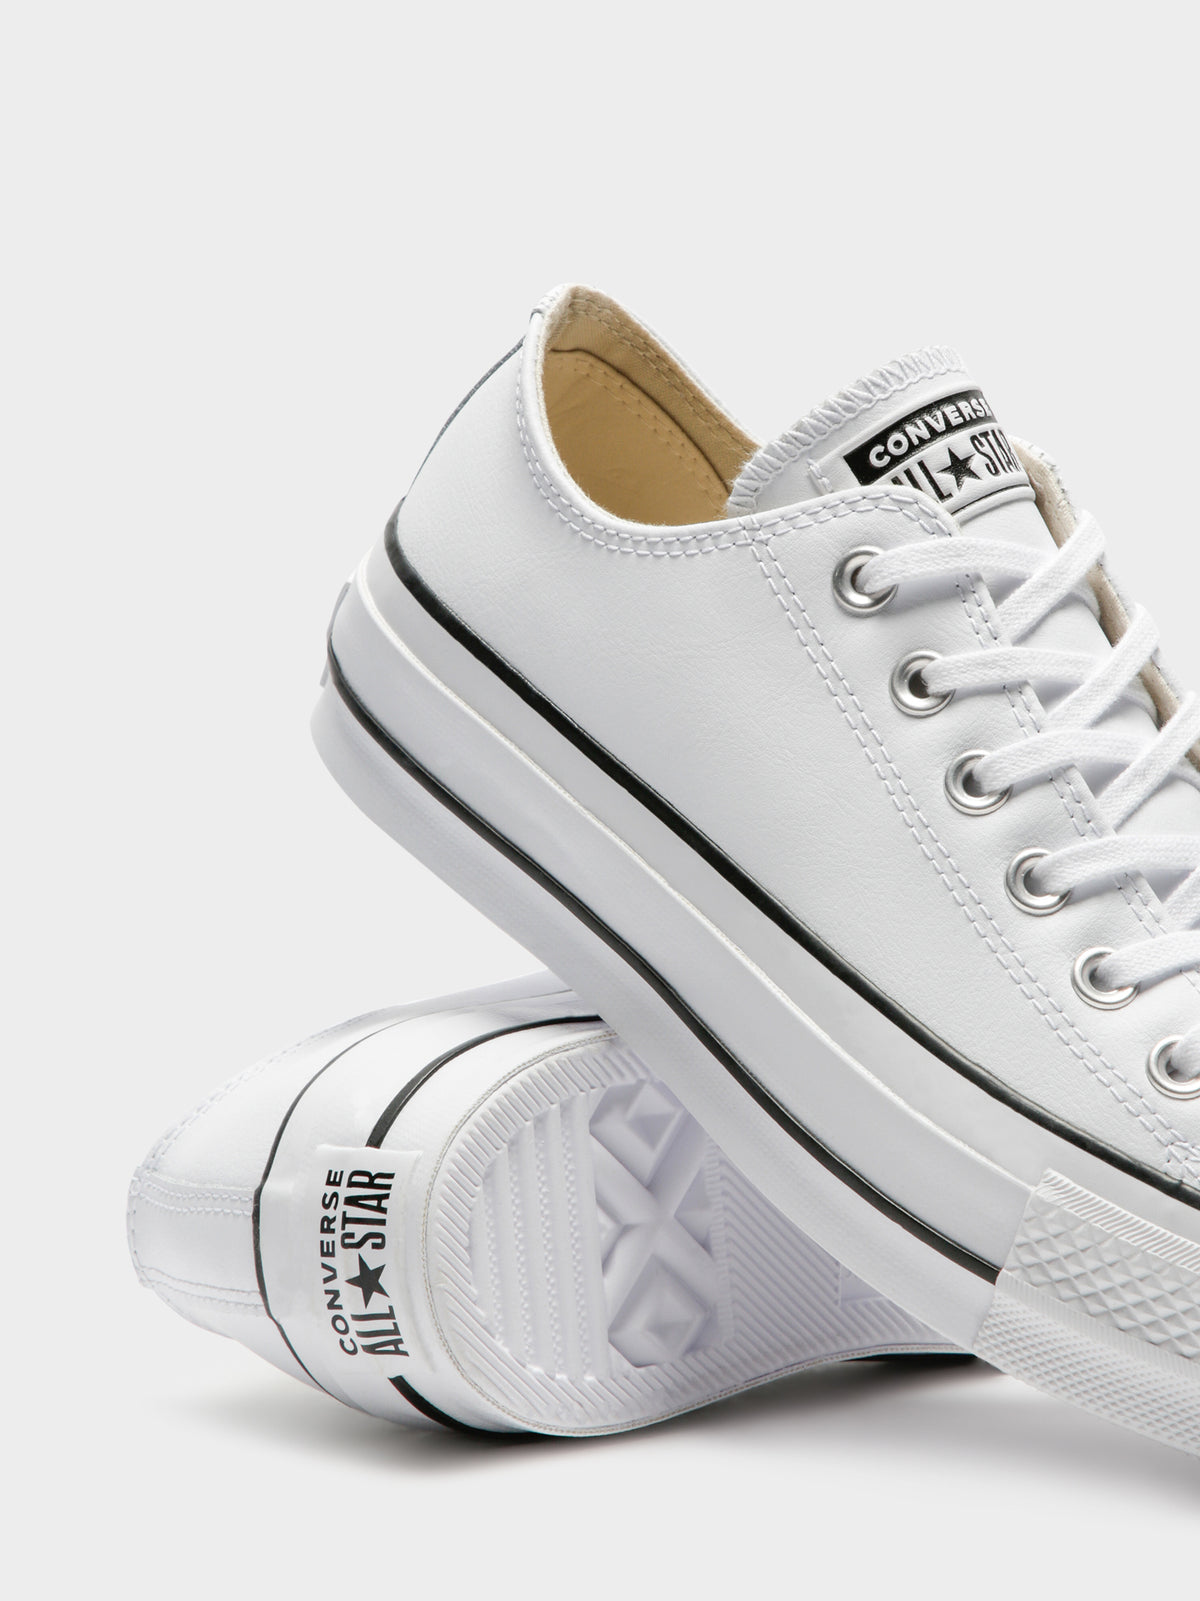 Womens Chuck Taylor All Star Leather Platform Sneakers in White & Blac ...